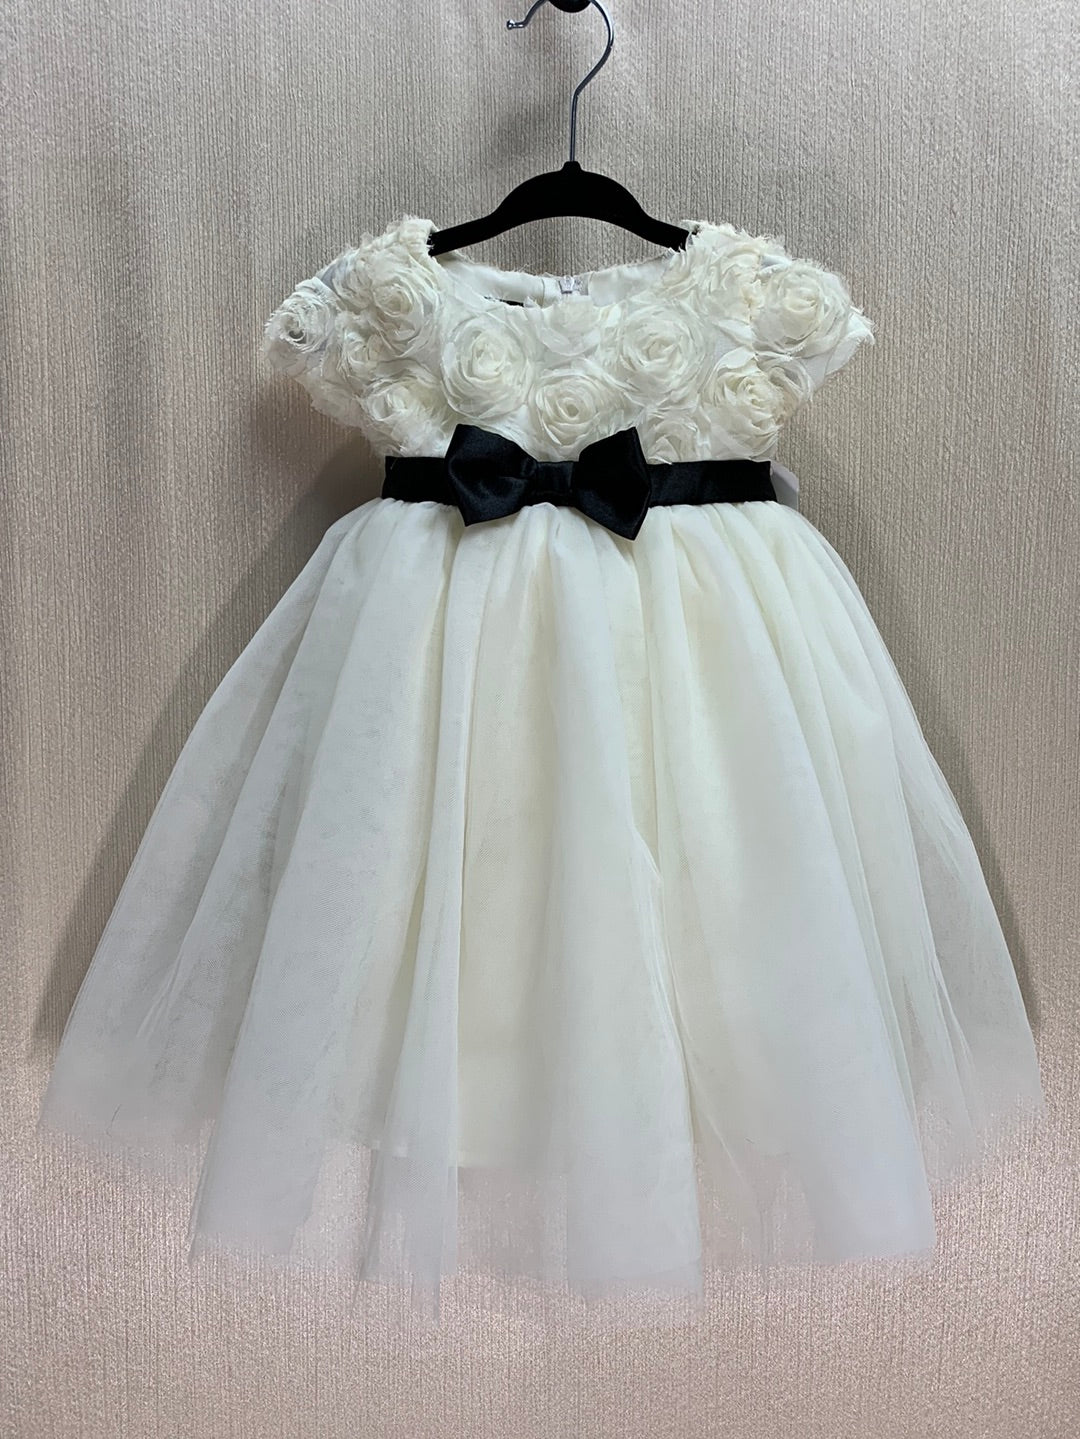 NWT - BISCOTTI ivory black Rosettes Tulle Standing Ovation Dress - 12 months